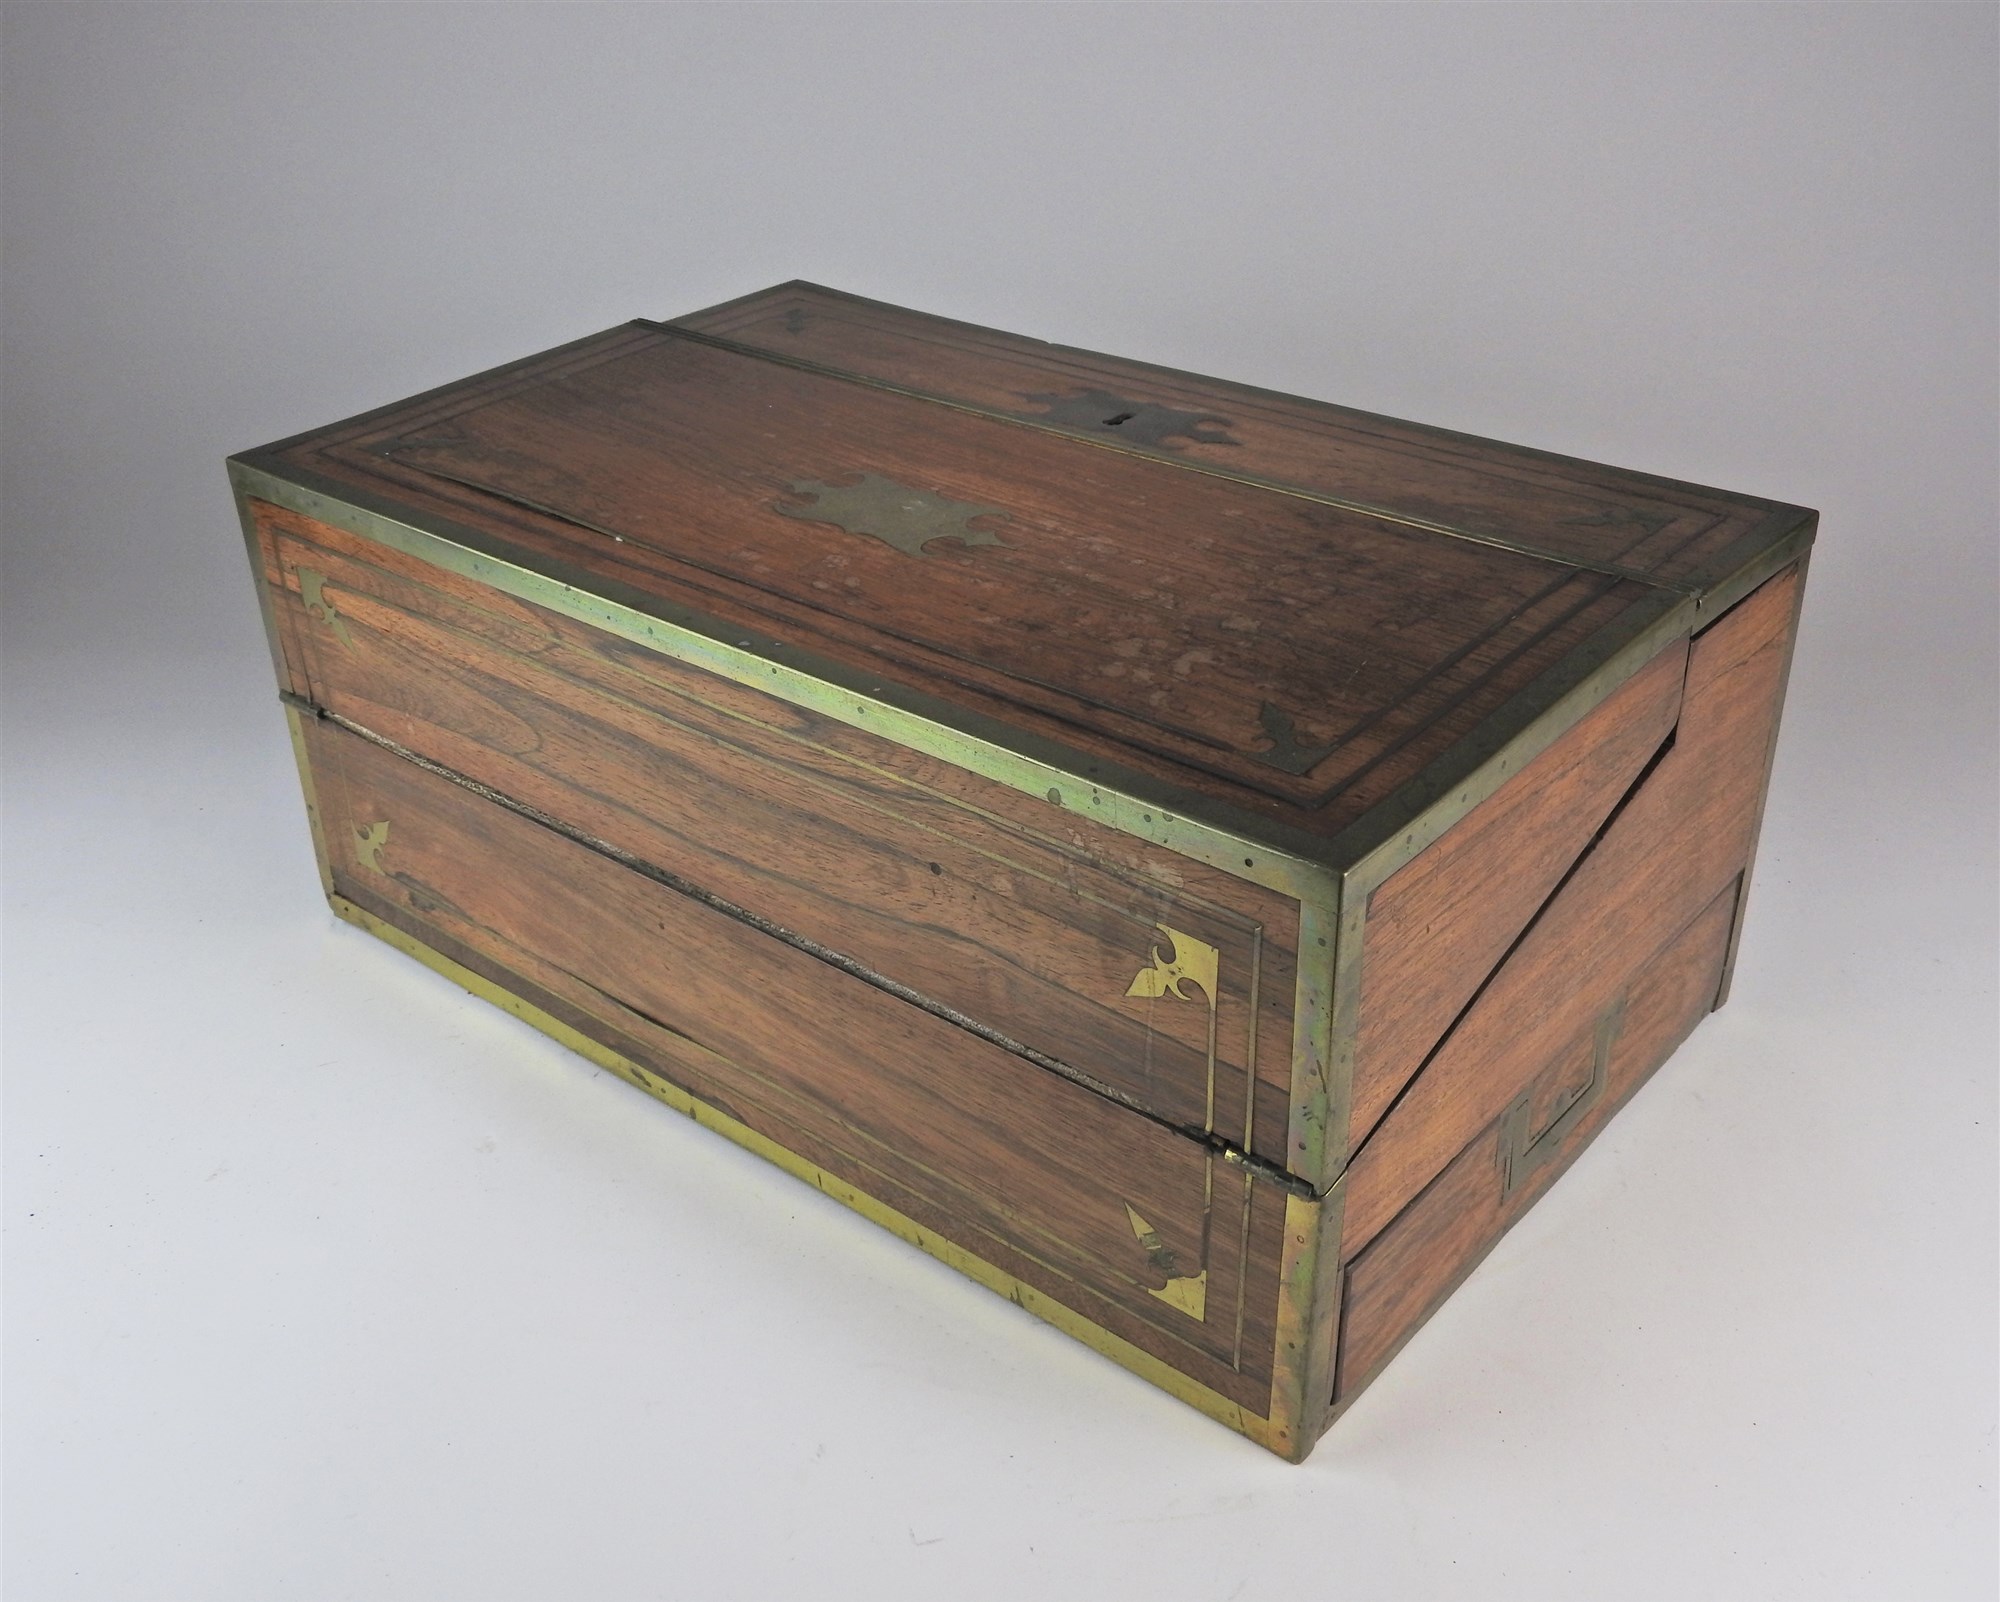 A rosewood and brass mounted campaign lap desk, mid 19th century - Image 2 of 2